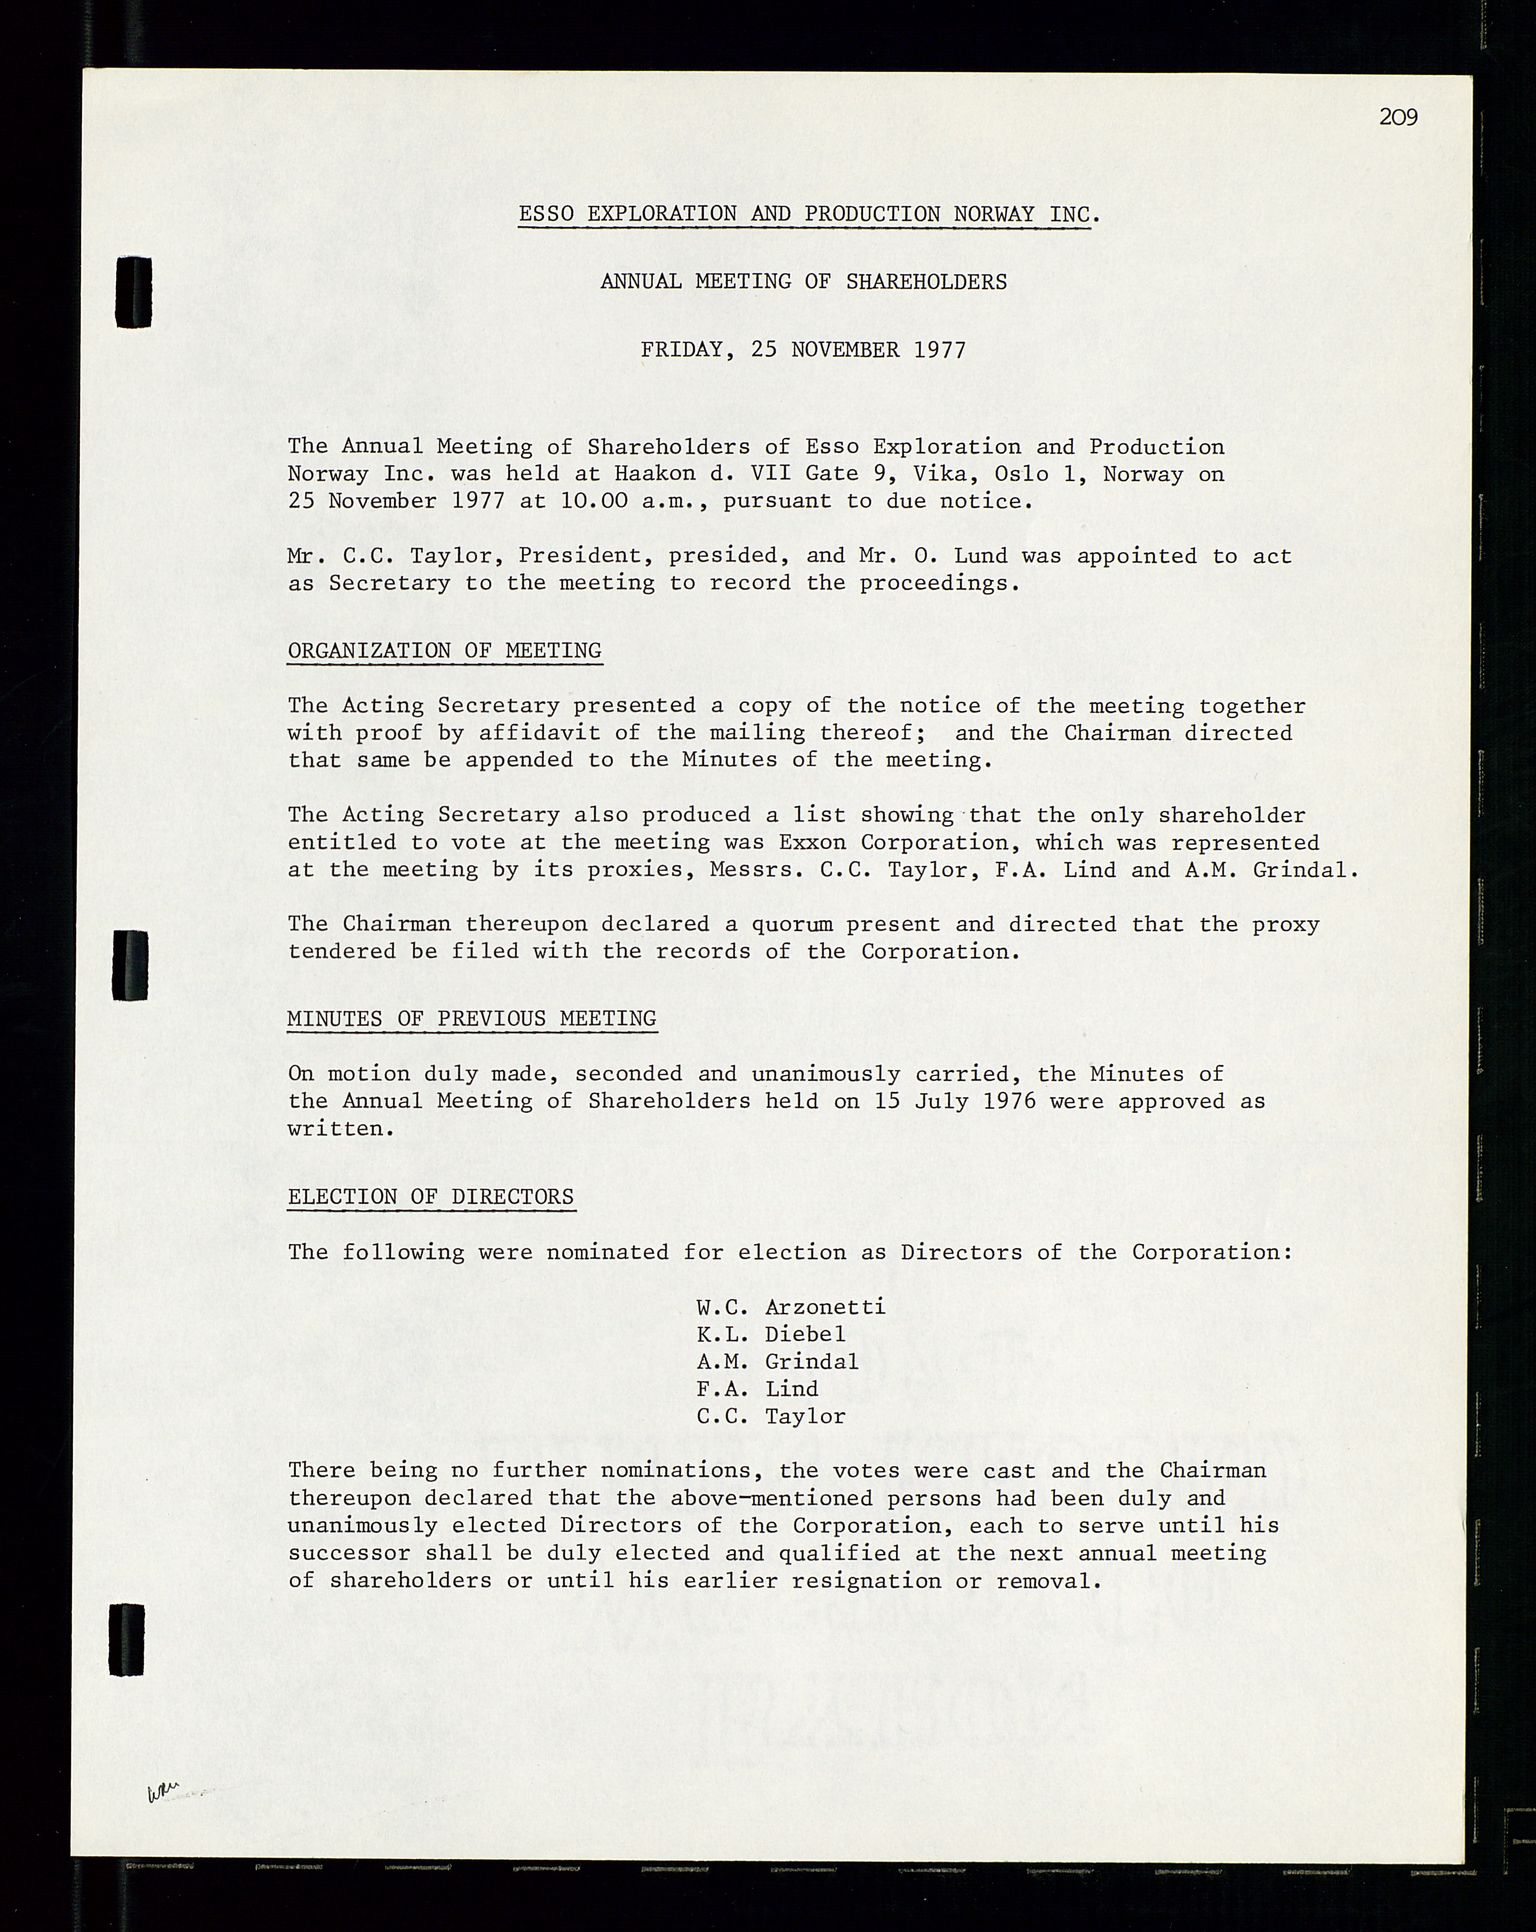 Pa 1512 - Esso Exploration and Production Norway Inc., SAST/A-101917/A/Aa/L0001/0002: Styredokumenter / Corporate records, Board meeting minutes, Agreements, Stocholder meetings, 1975-1979, s. 64